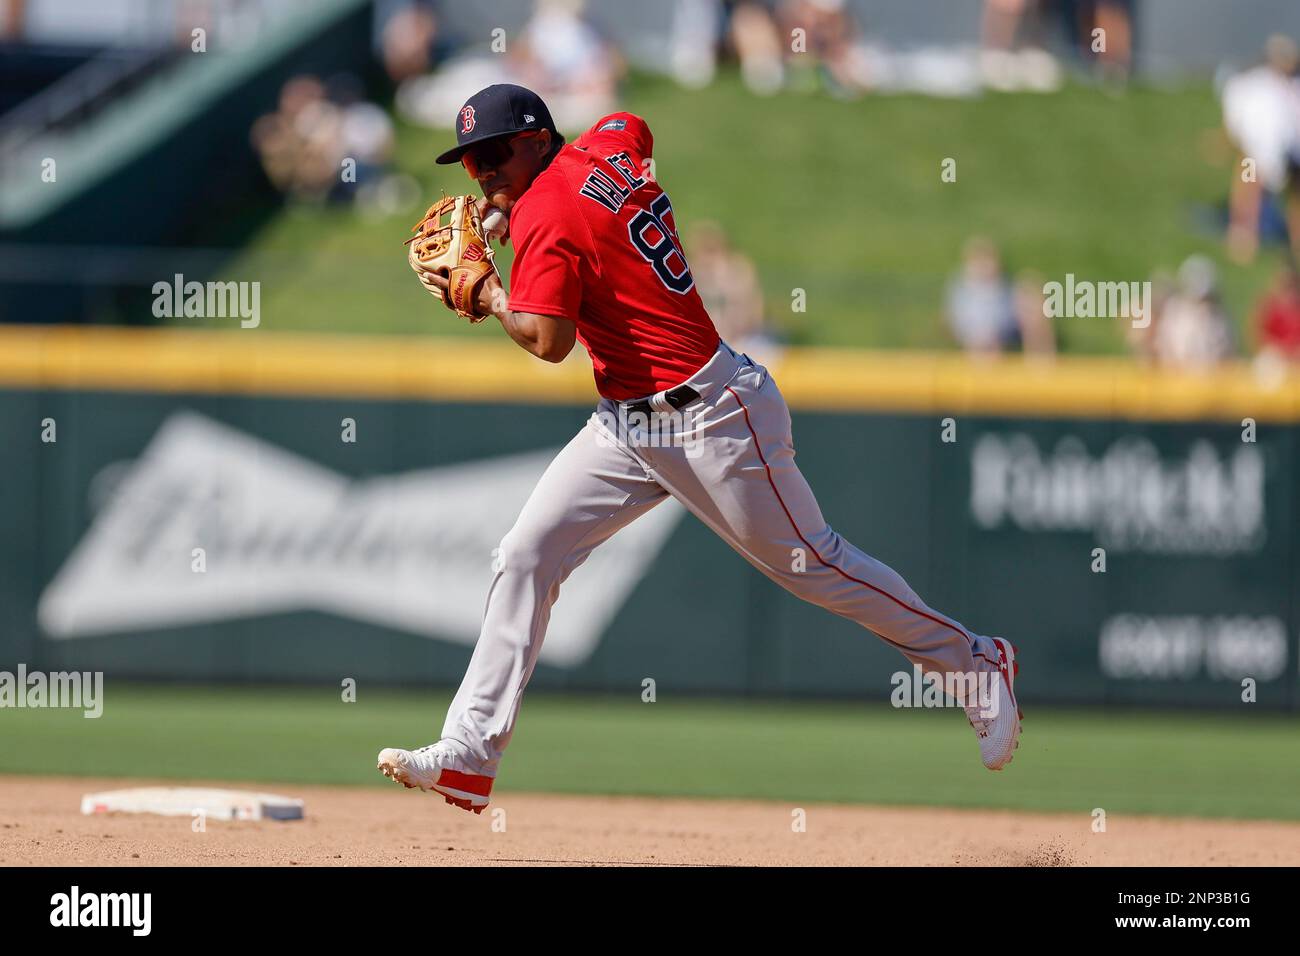 North Port FL USA: Boston Red Sox third baseman Enmanuel Valdez (83) runs to field a hard hit ball and throws to first for the out during an MLB sprin Stock Photo